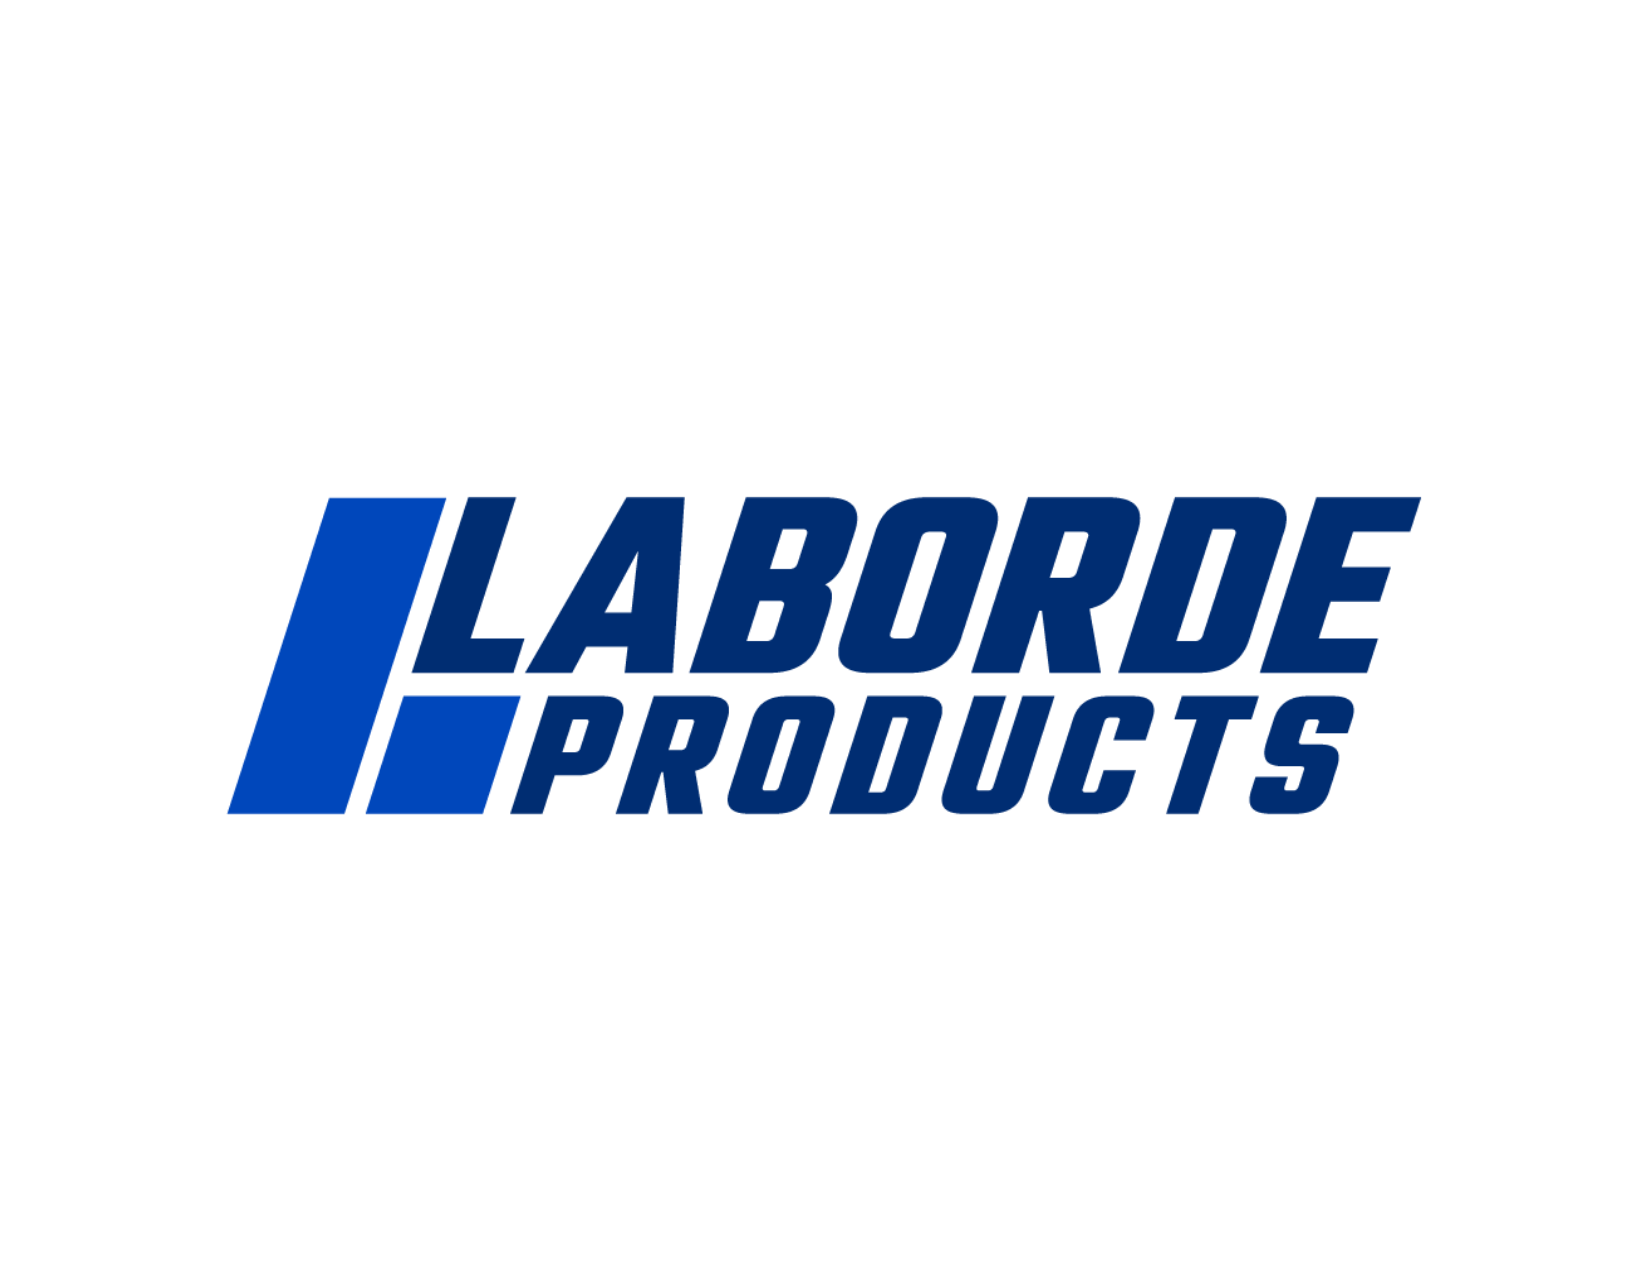 laborde products logo